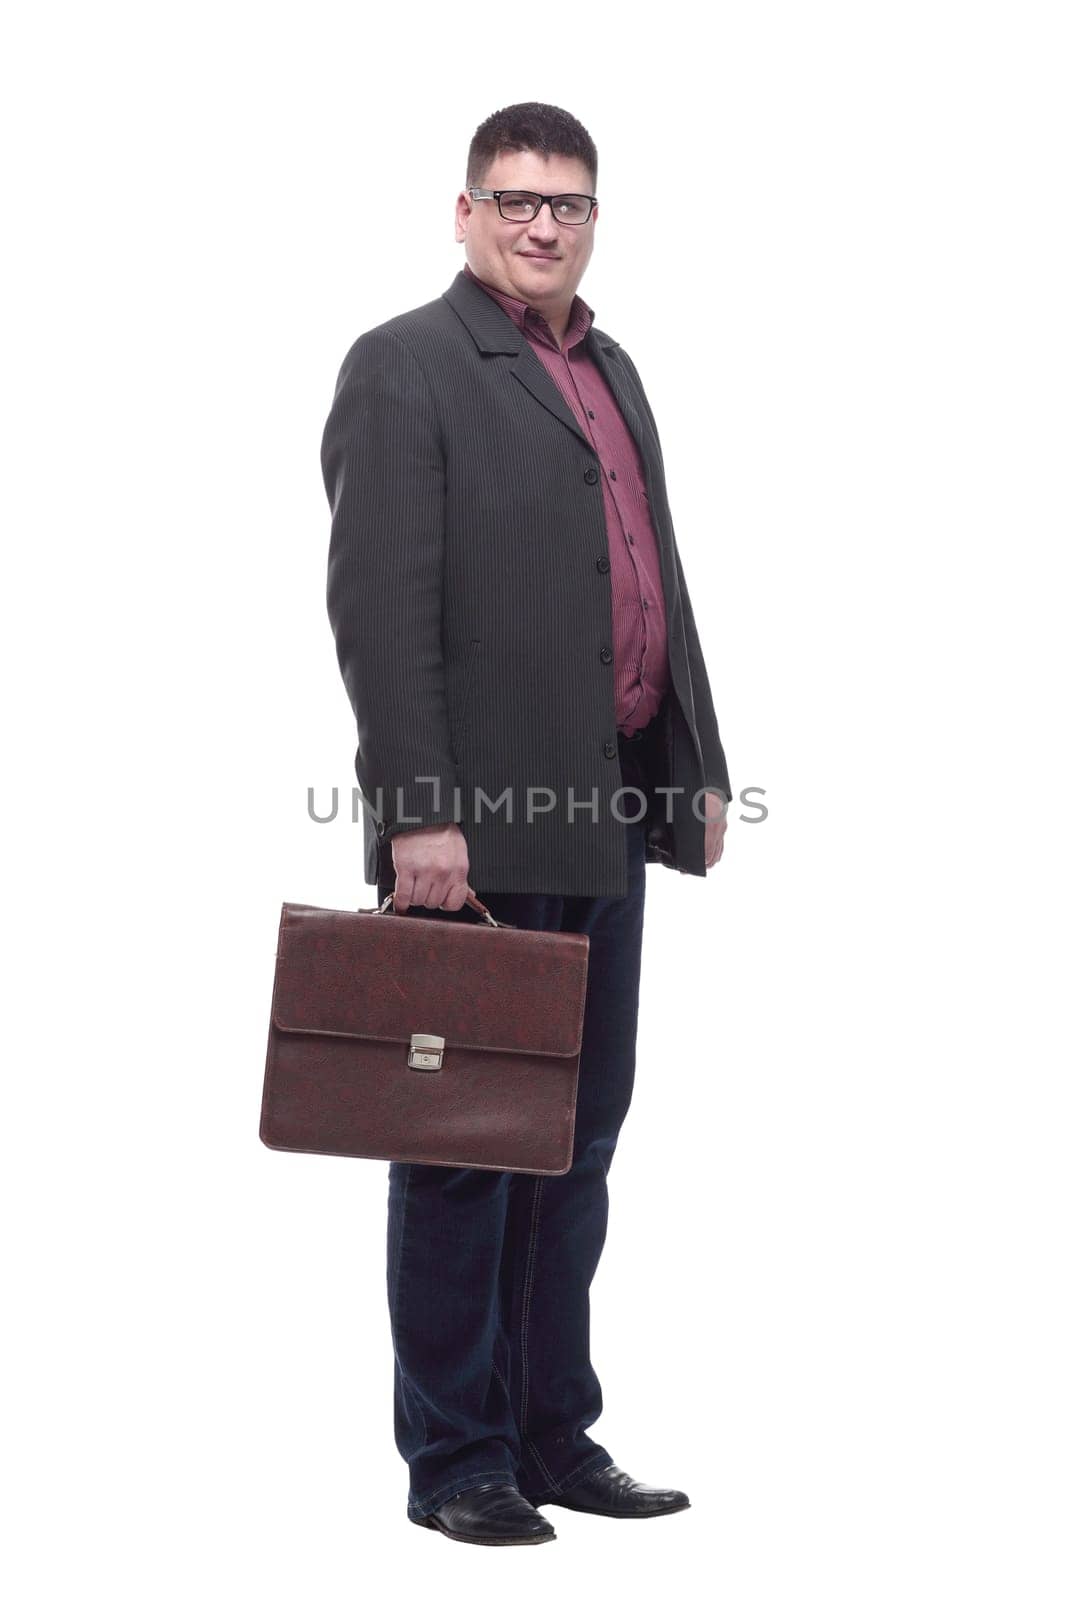 Mature business man with a leather briefcase. isolated on a white background.